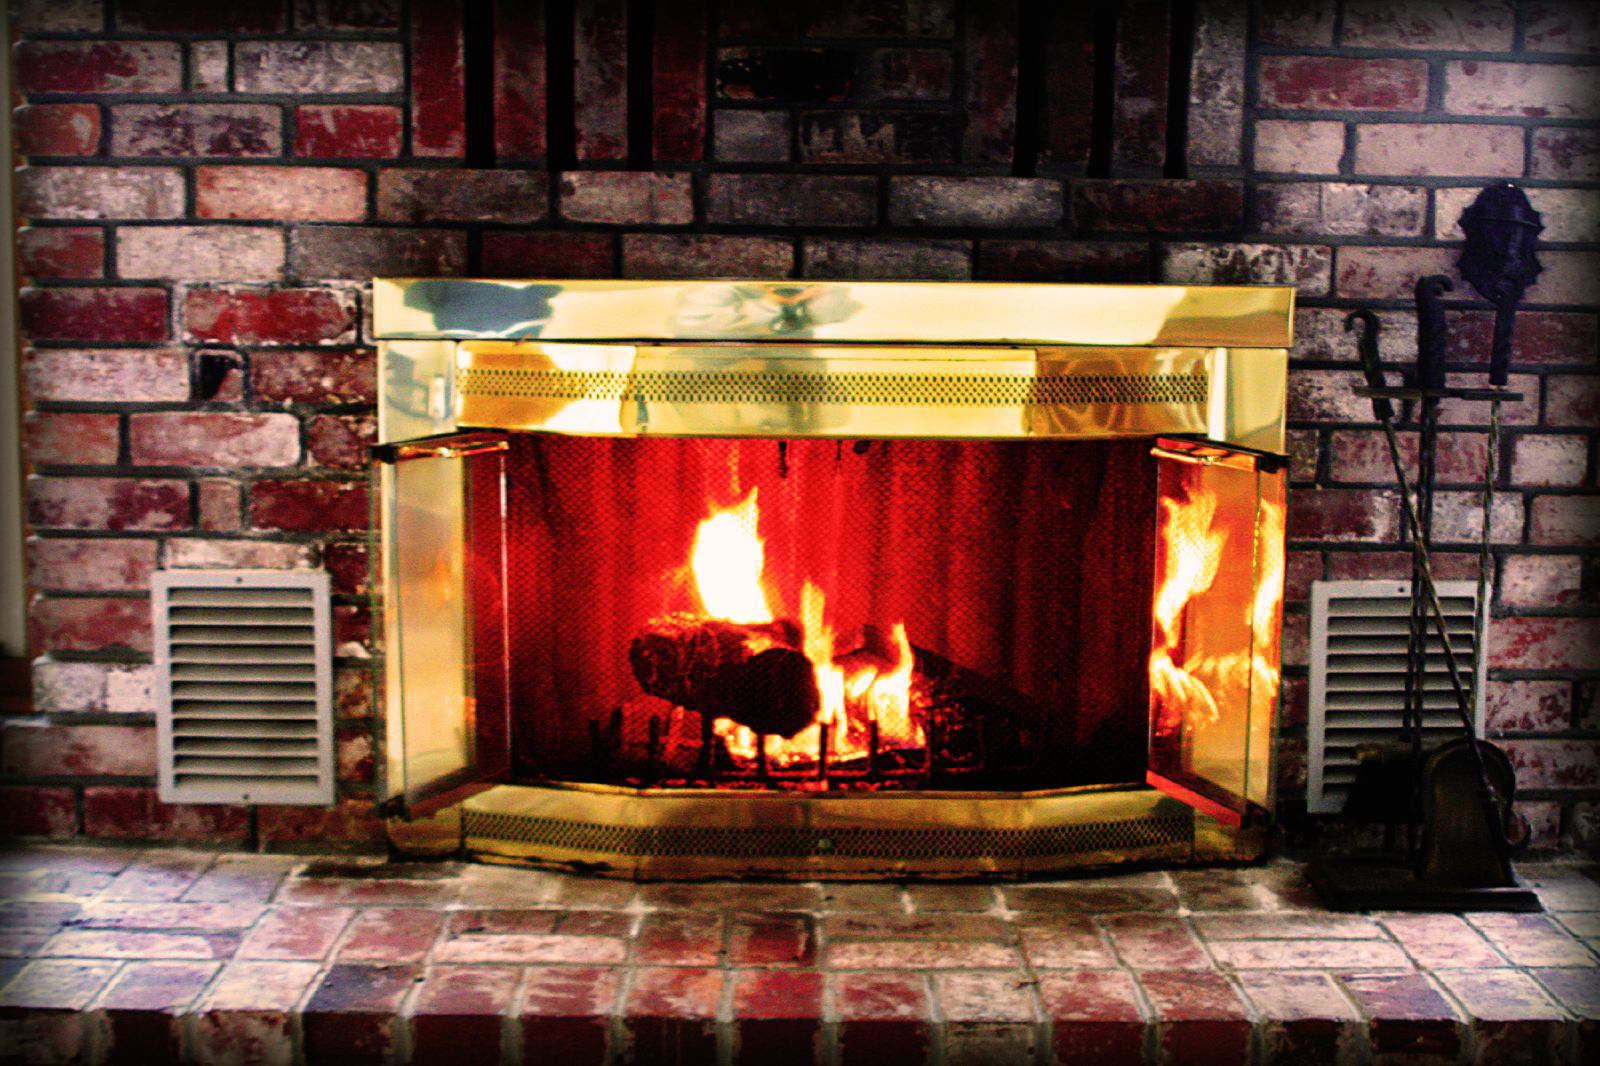 Replace the fireplace glass door and fix the damper, or use a Chimney Balloon?